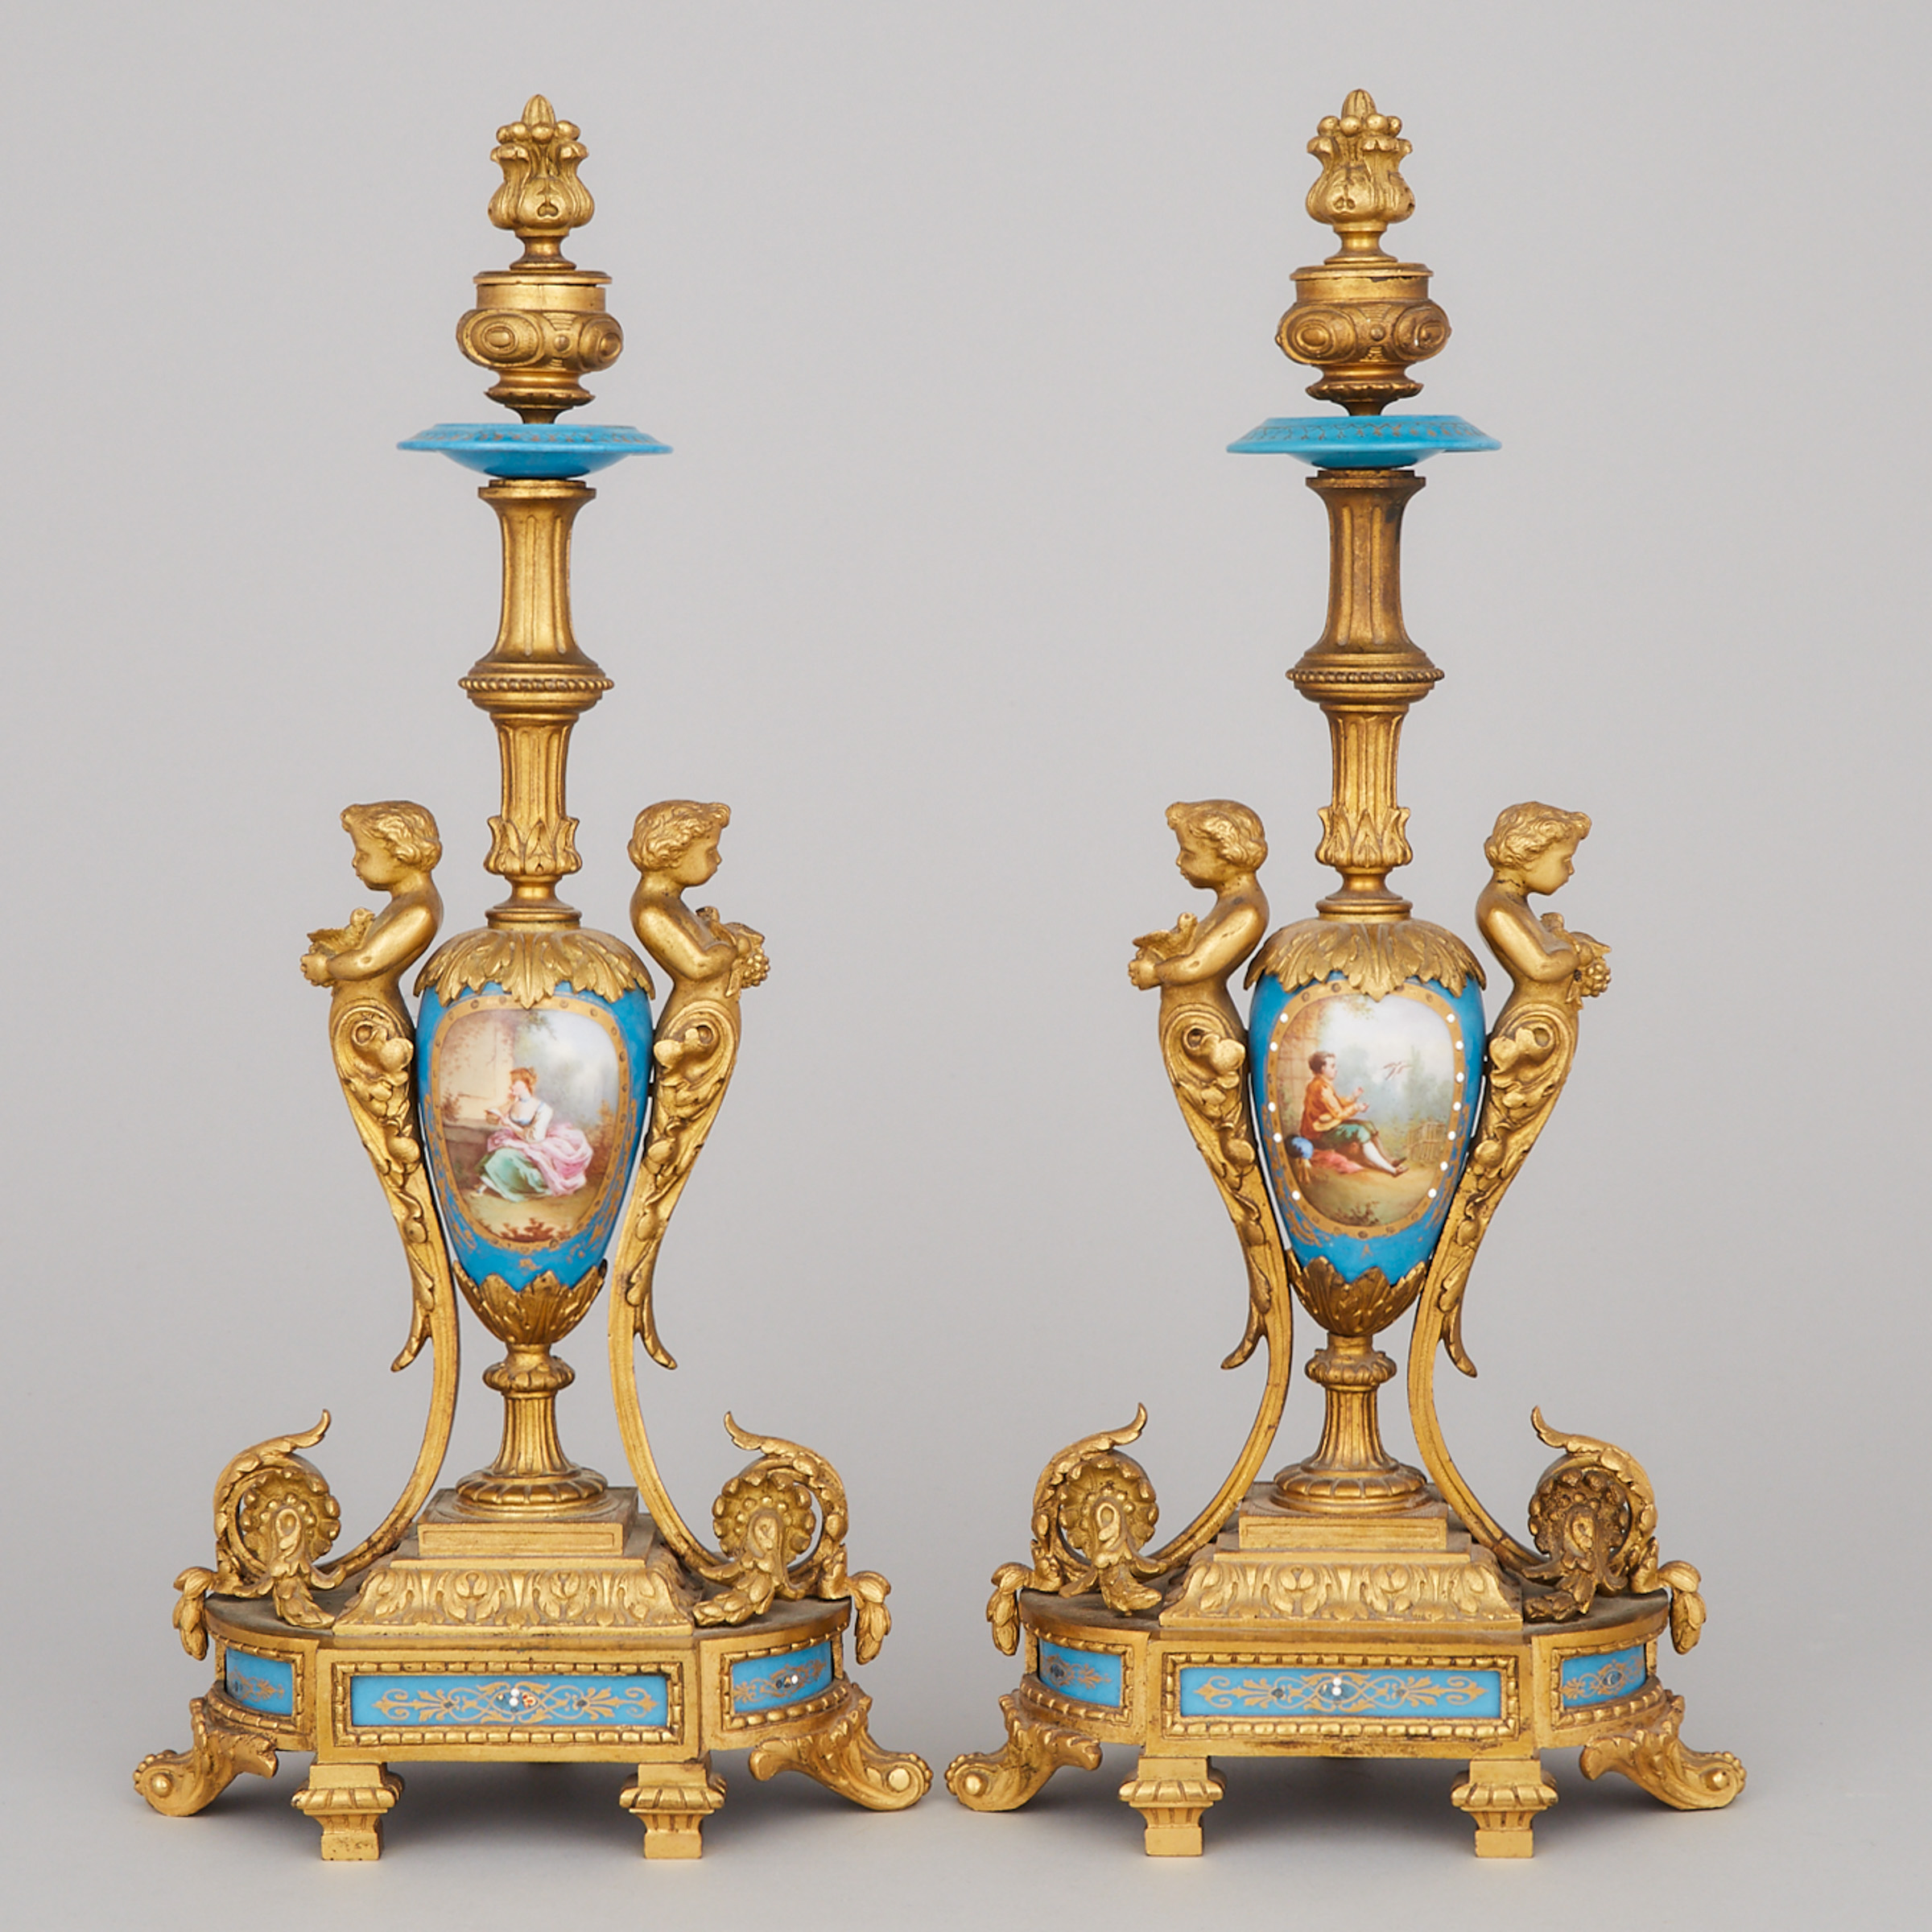 Pair of Ormolu Mounted 'Sèvres' Candlesticks, late 19th century